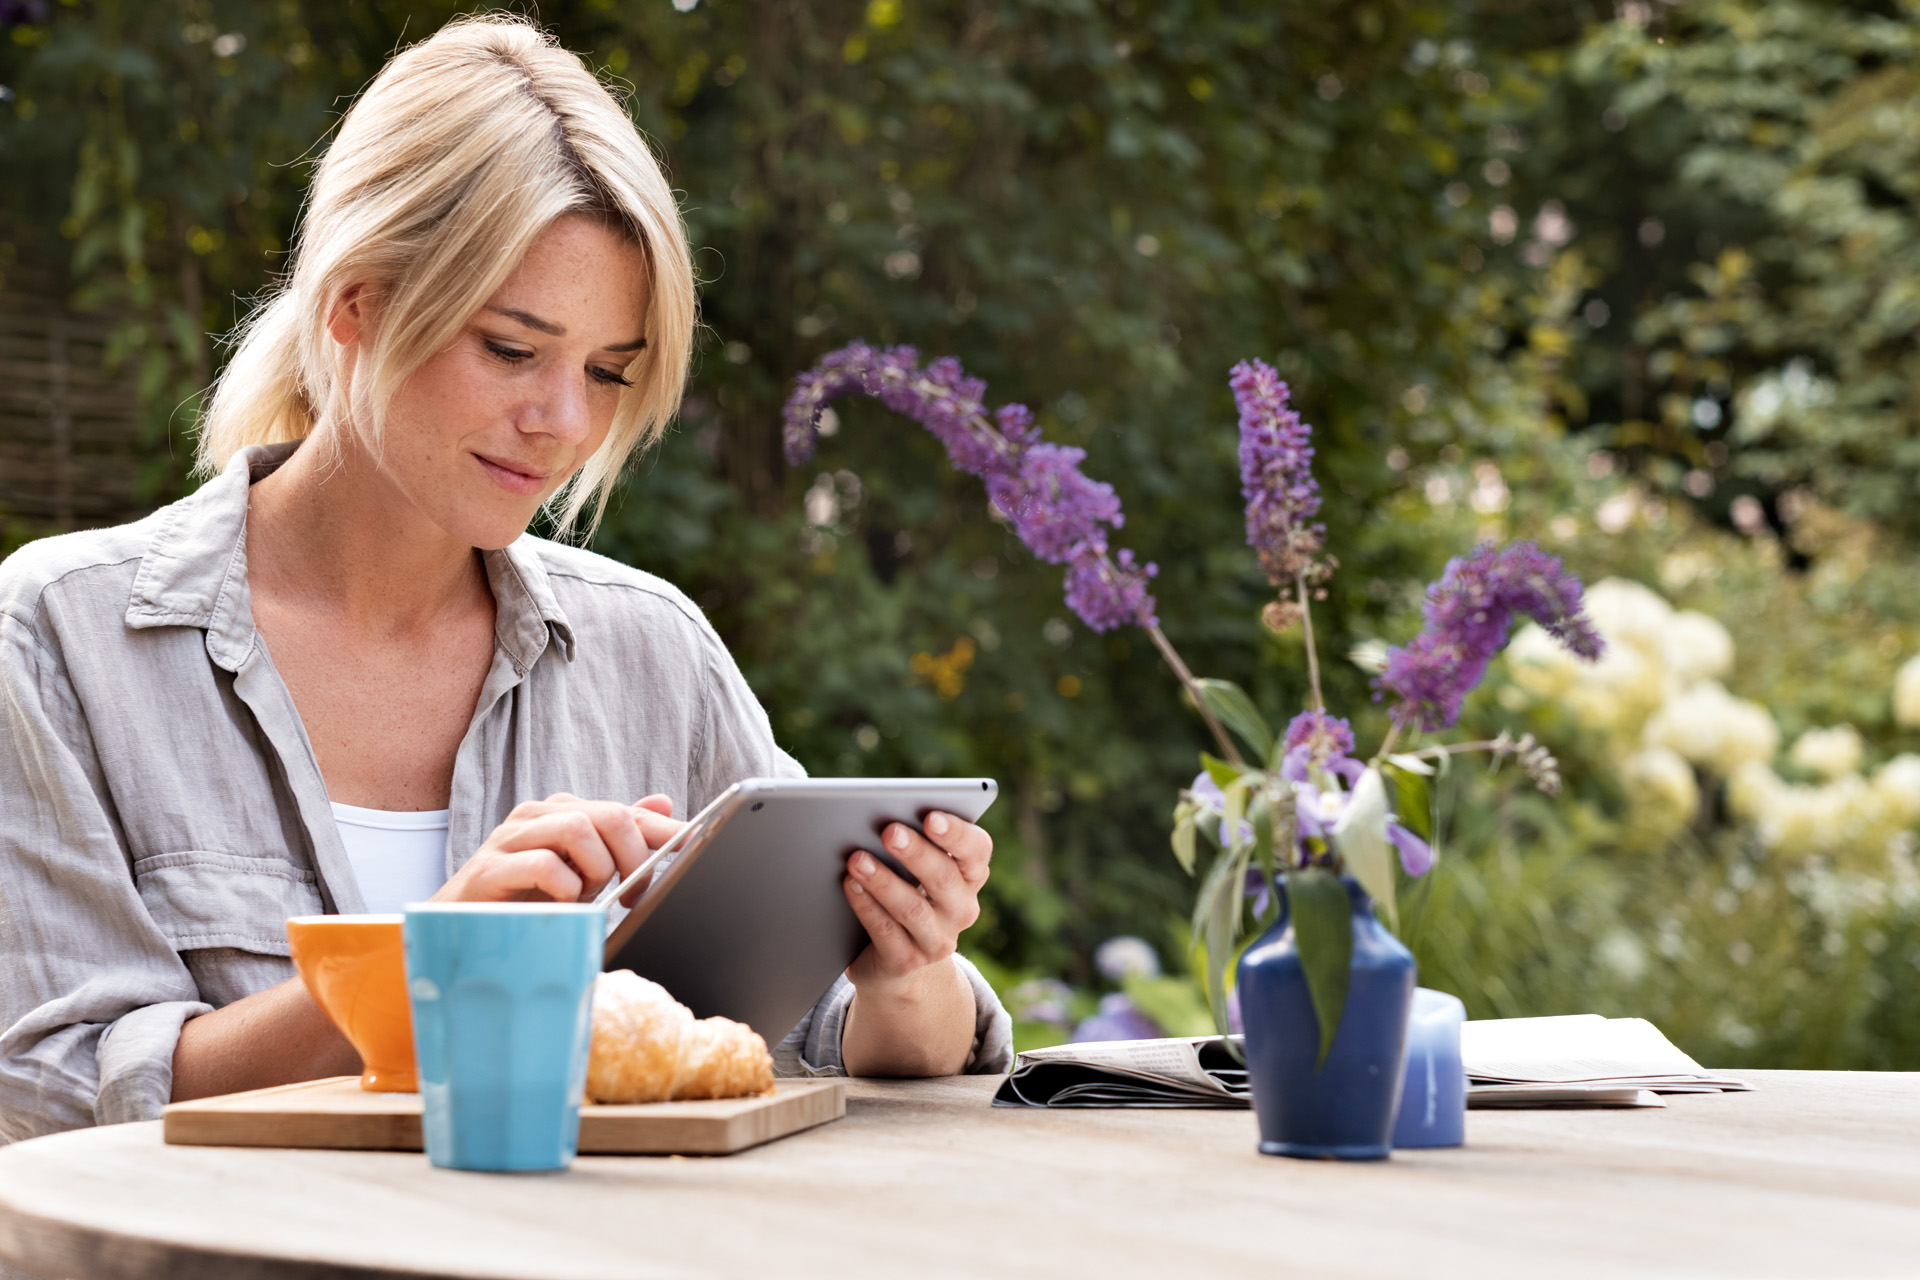 A woman using a tablet at a breakfast table in a garden